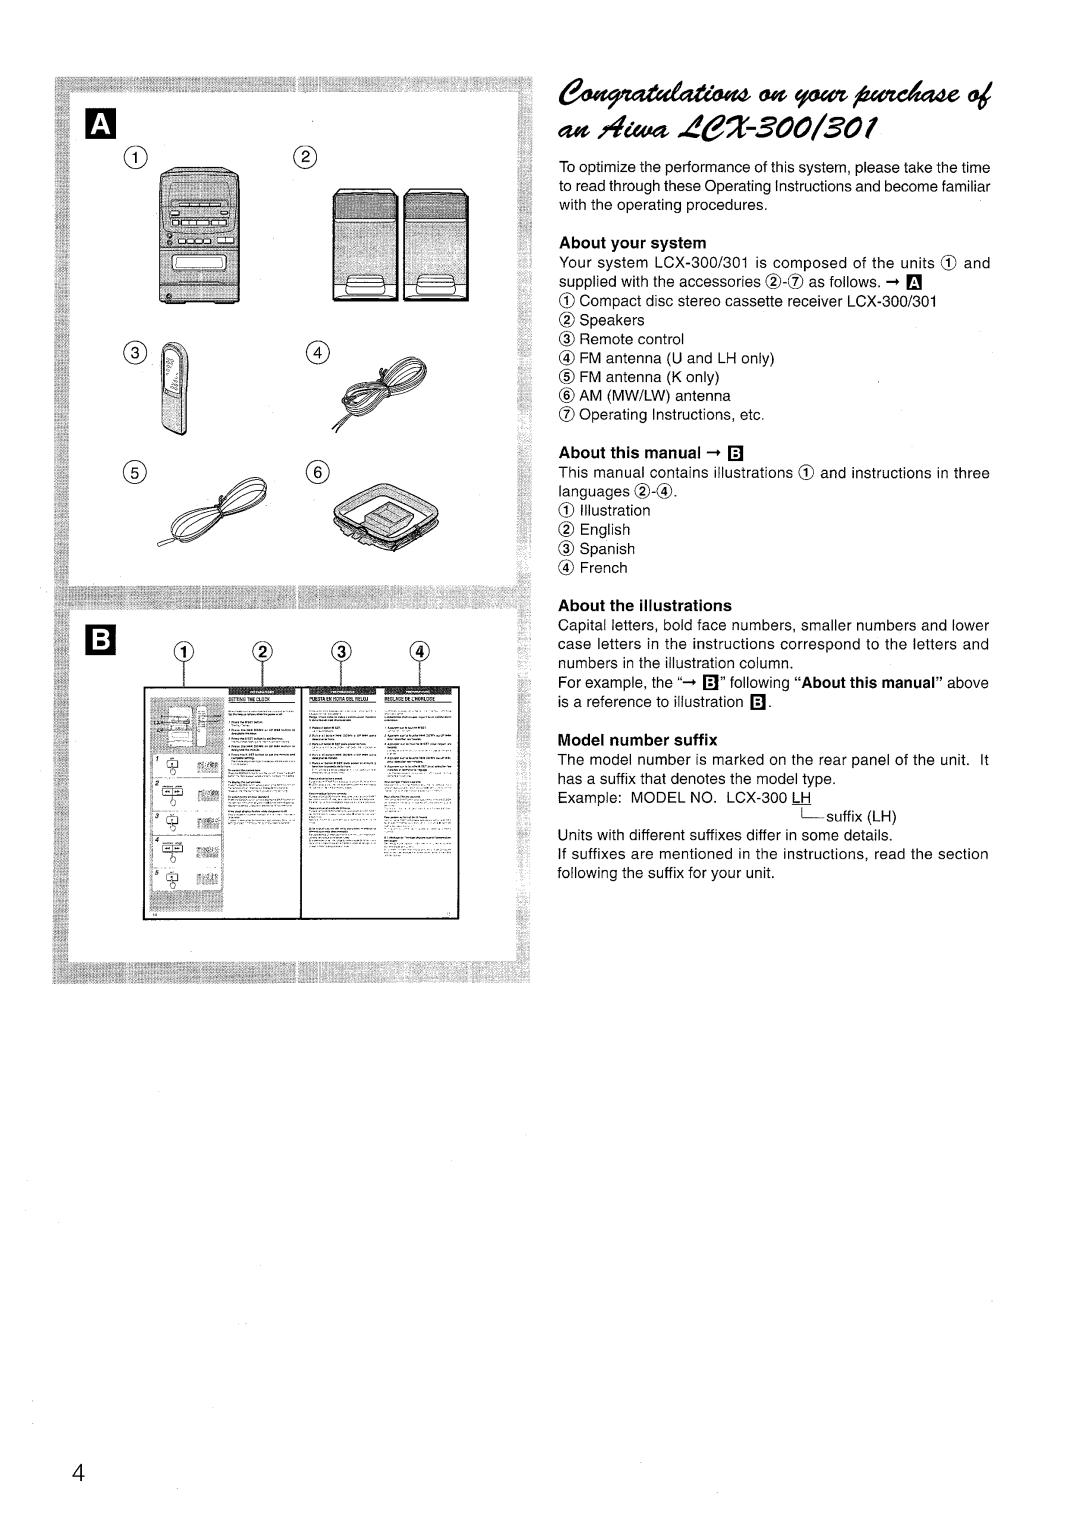 Aiwa LCX=300, LCX-301 your, system, About this manual + E, About the illustrations, Model number suffix 